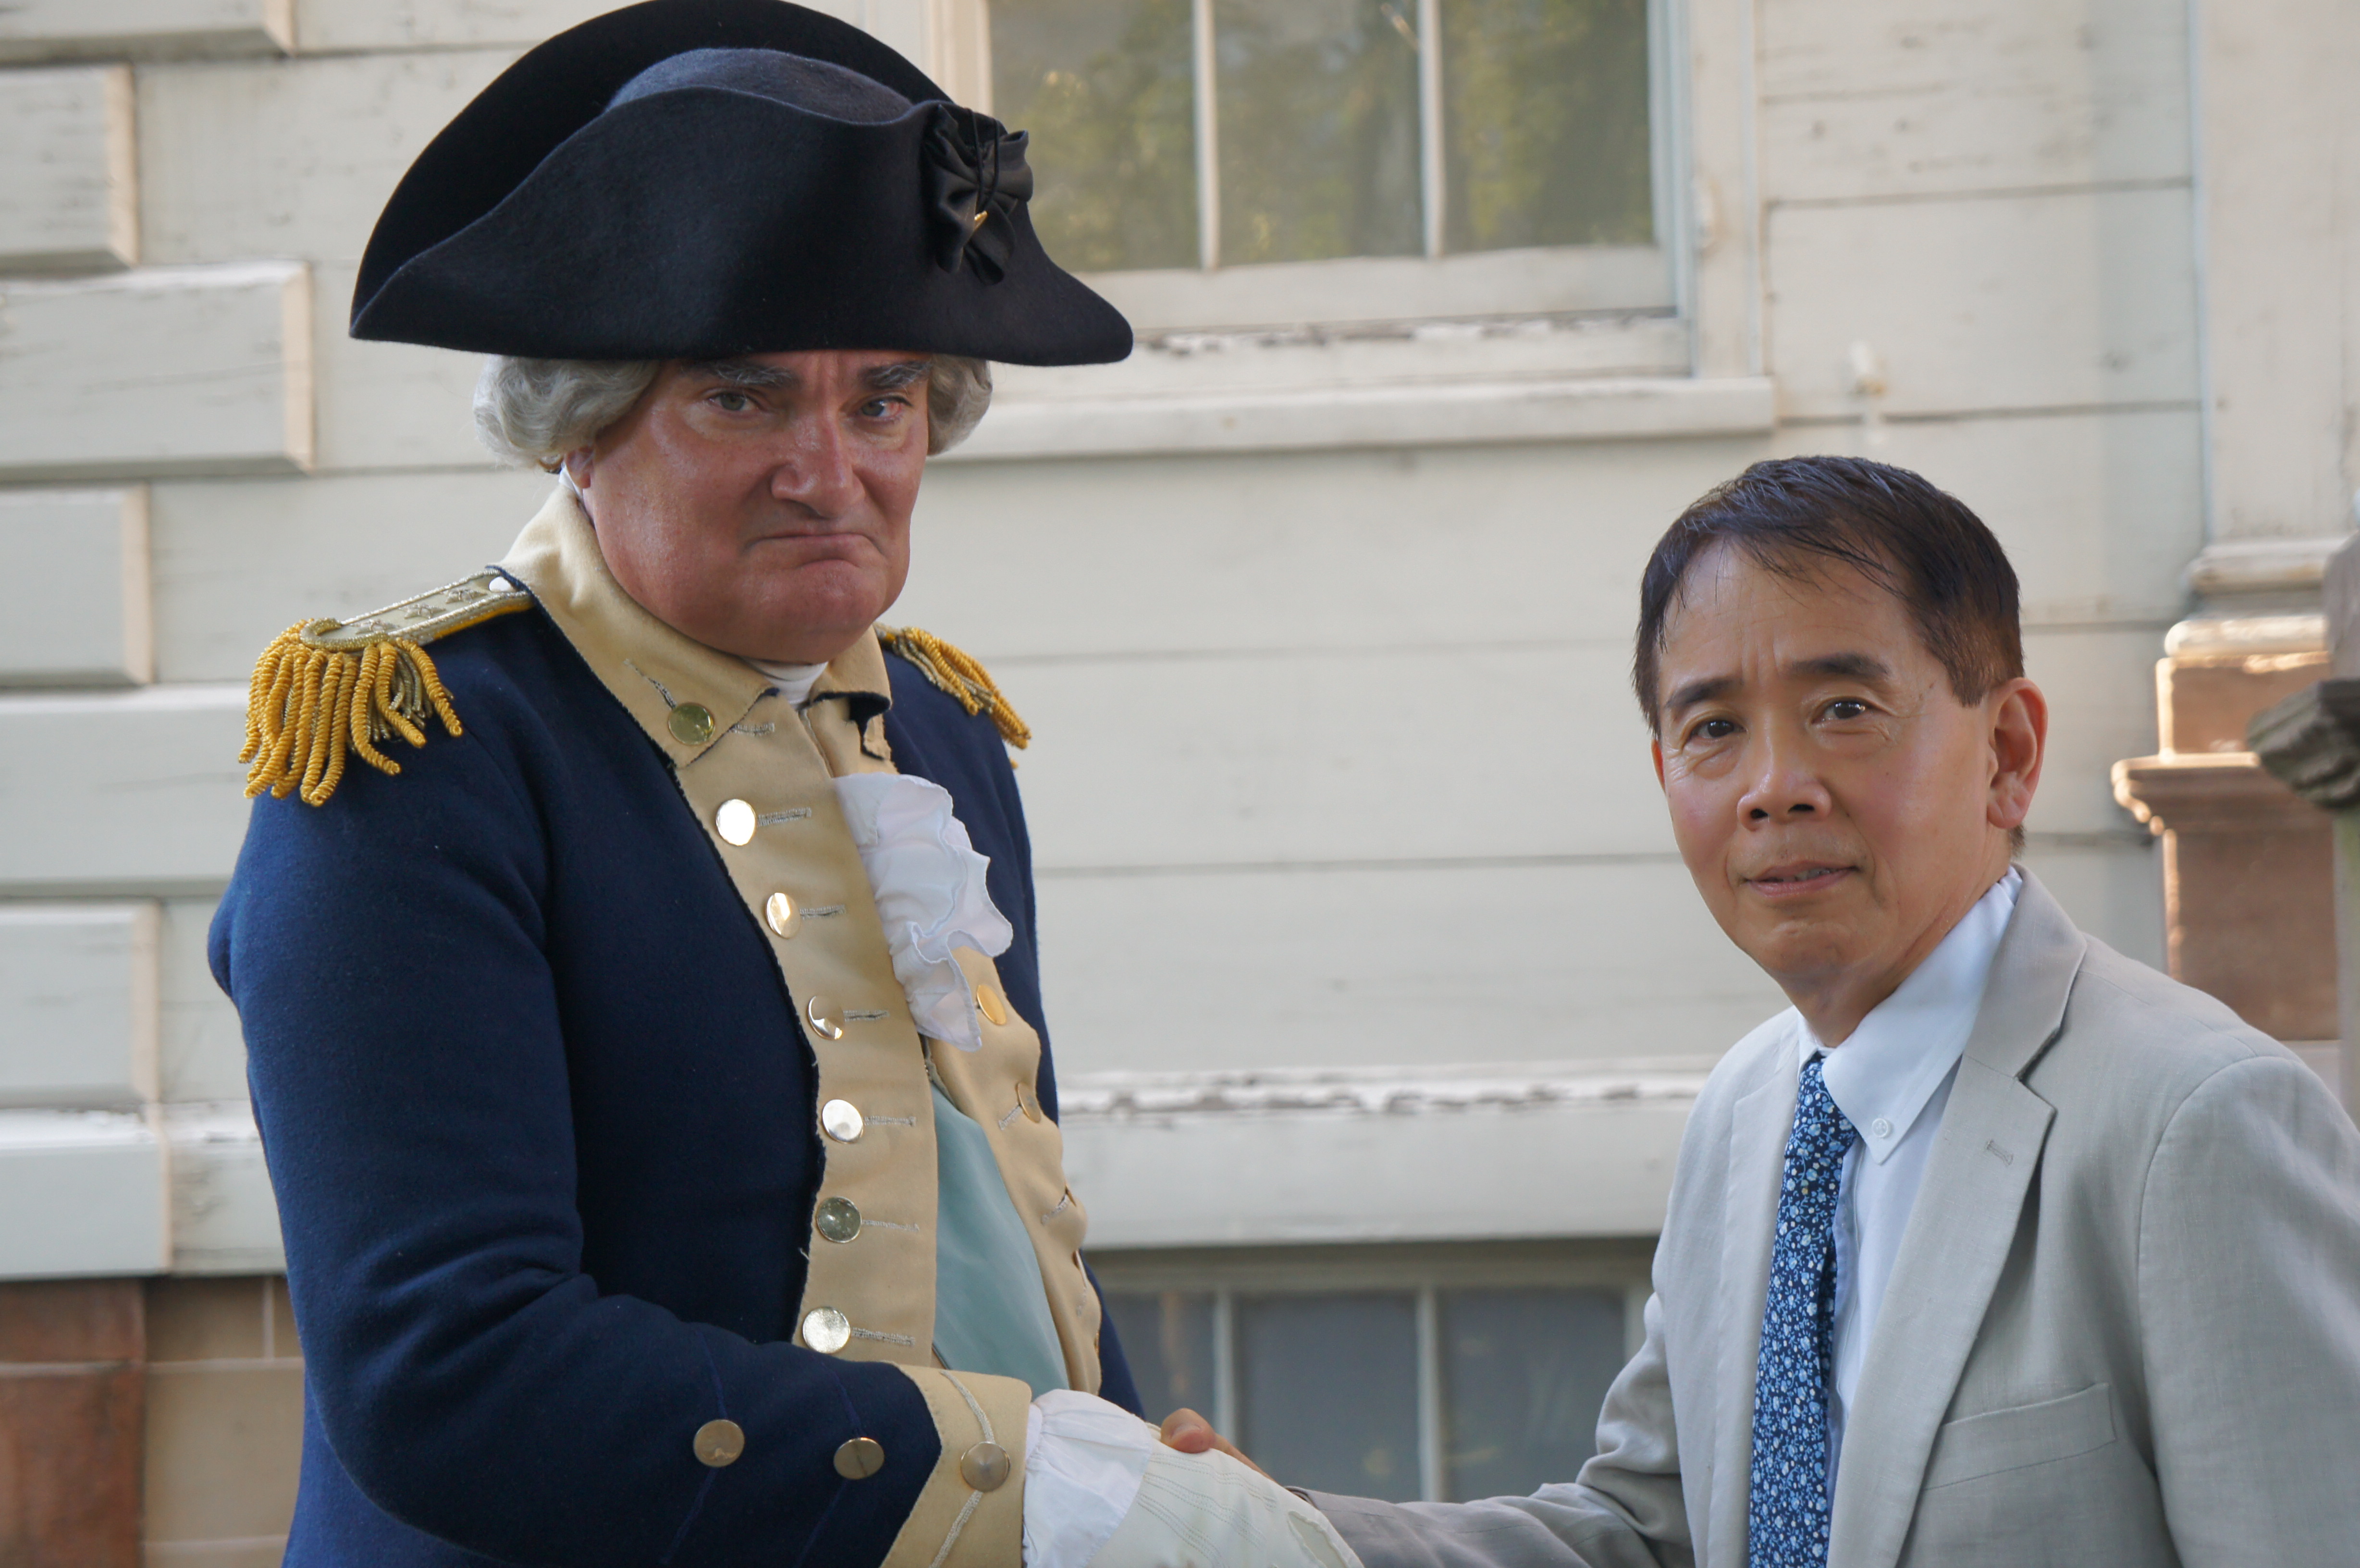 Reviewing my dinner remarks with President Washington at the Morris Jumel Mansion, New York.